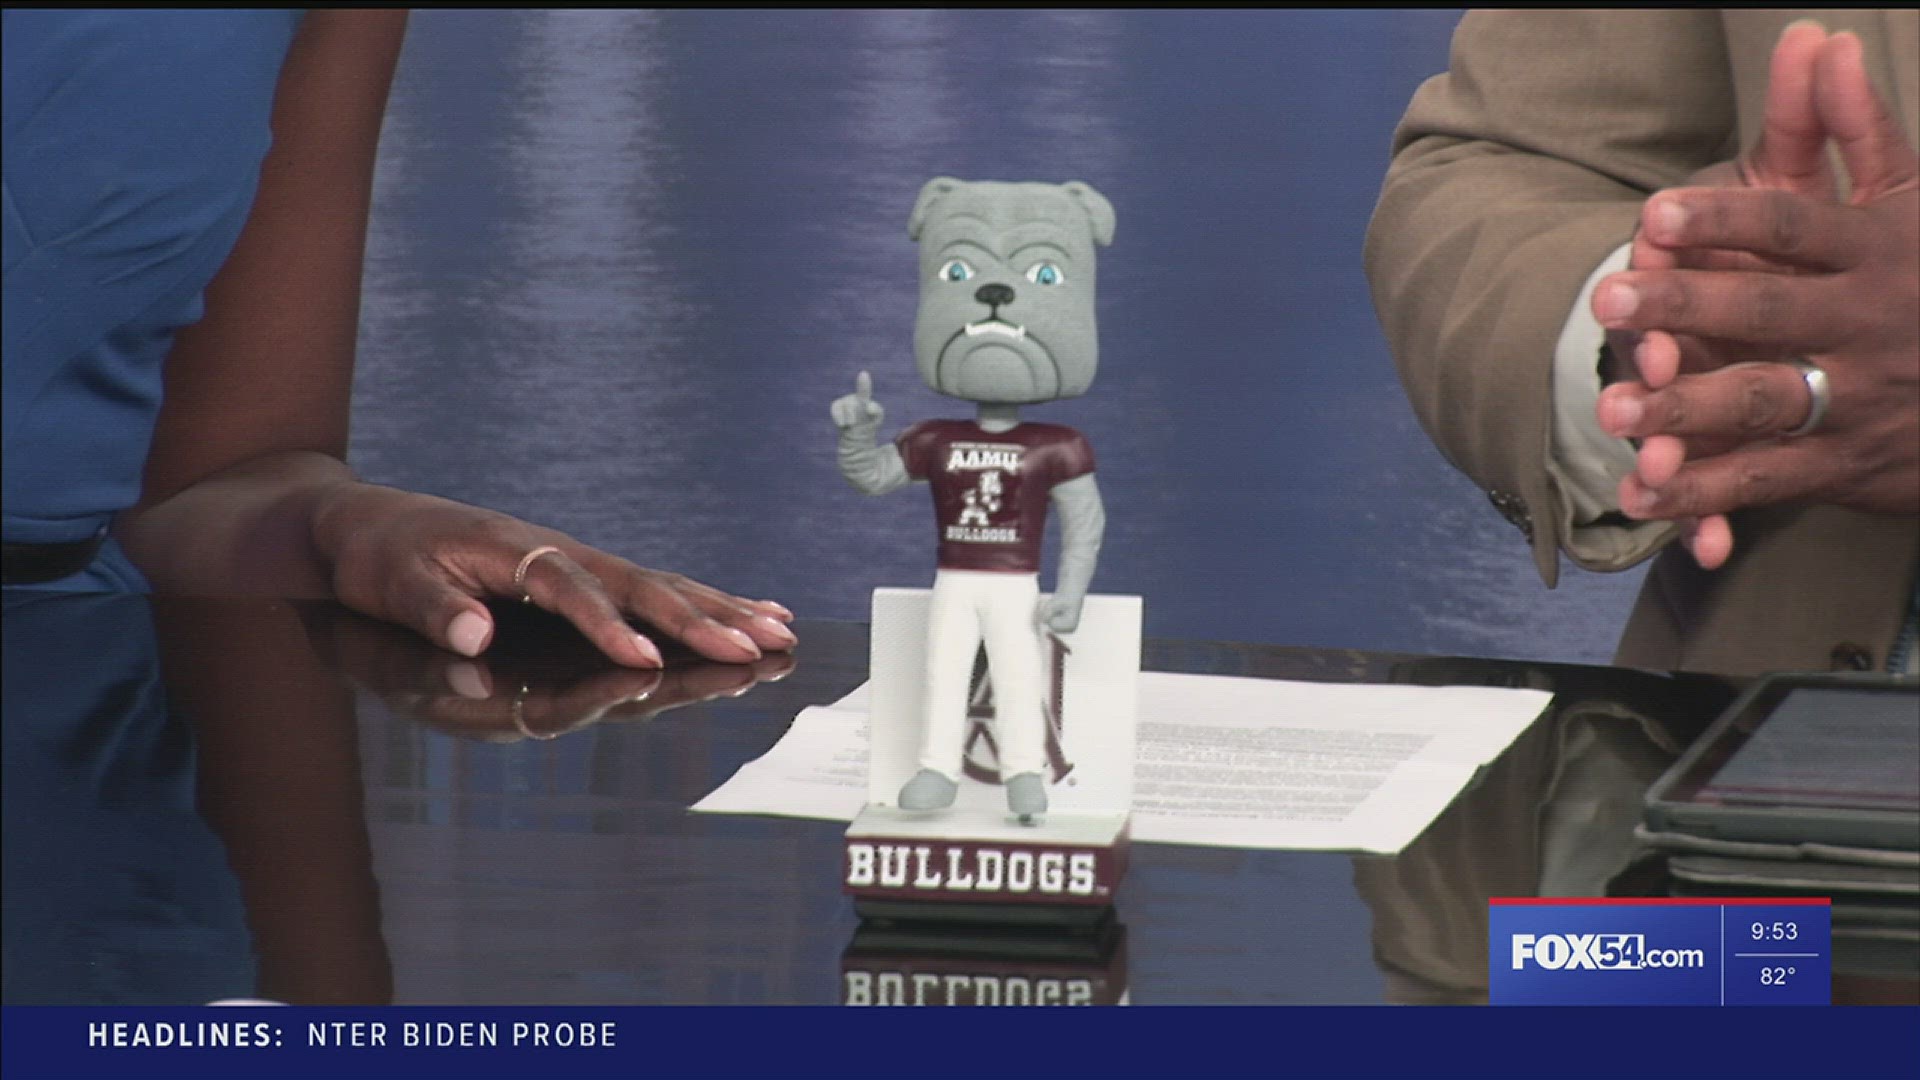 The limited-edition run is part of a series highlighting Historically Black Colleges and Universities. FOX54 received one of the 2,023 Bulldogs to examine.